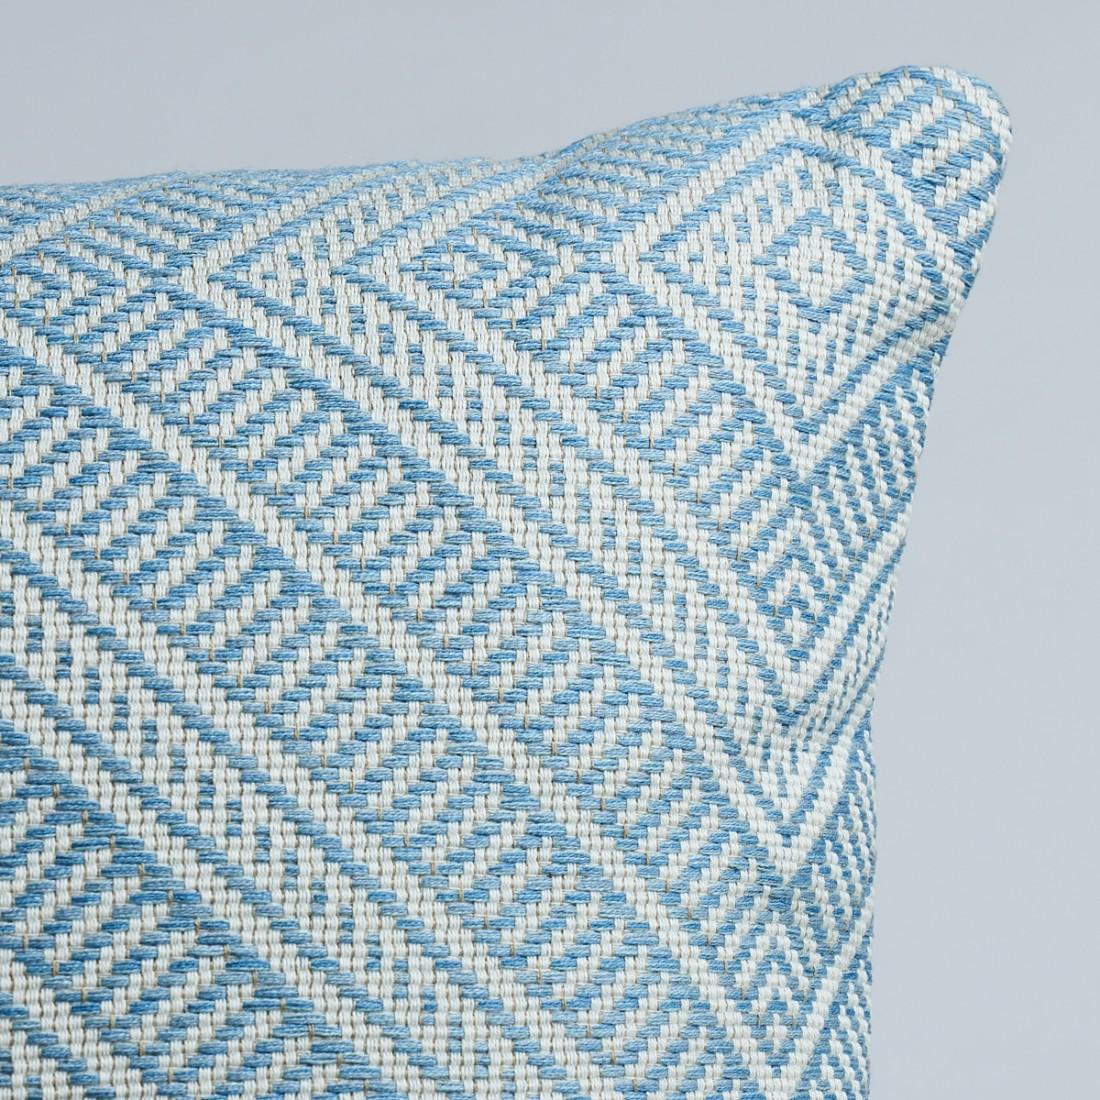 This pillow features Tortola with a Knife Edge finish. Inspired by basket designs, this concentric diamond pattern is woven from Dralon acrylic yarns. Textured and extremely durable, it is suitable for both indoor or outdoor settings. Pillow